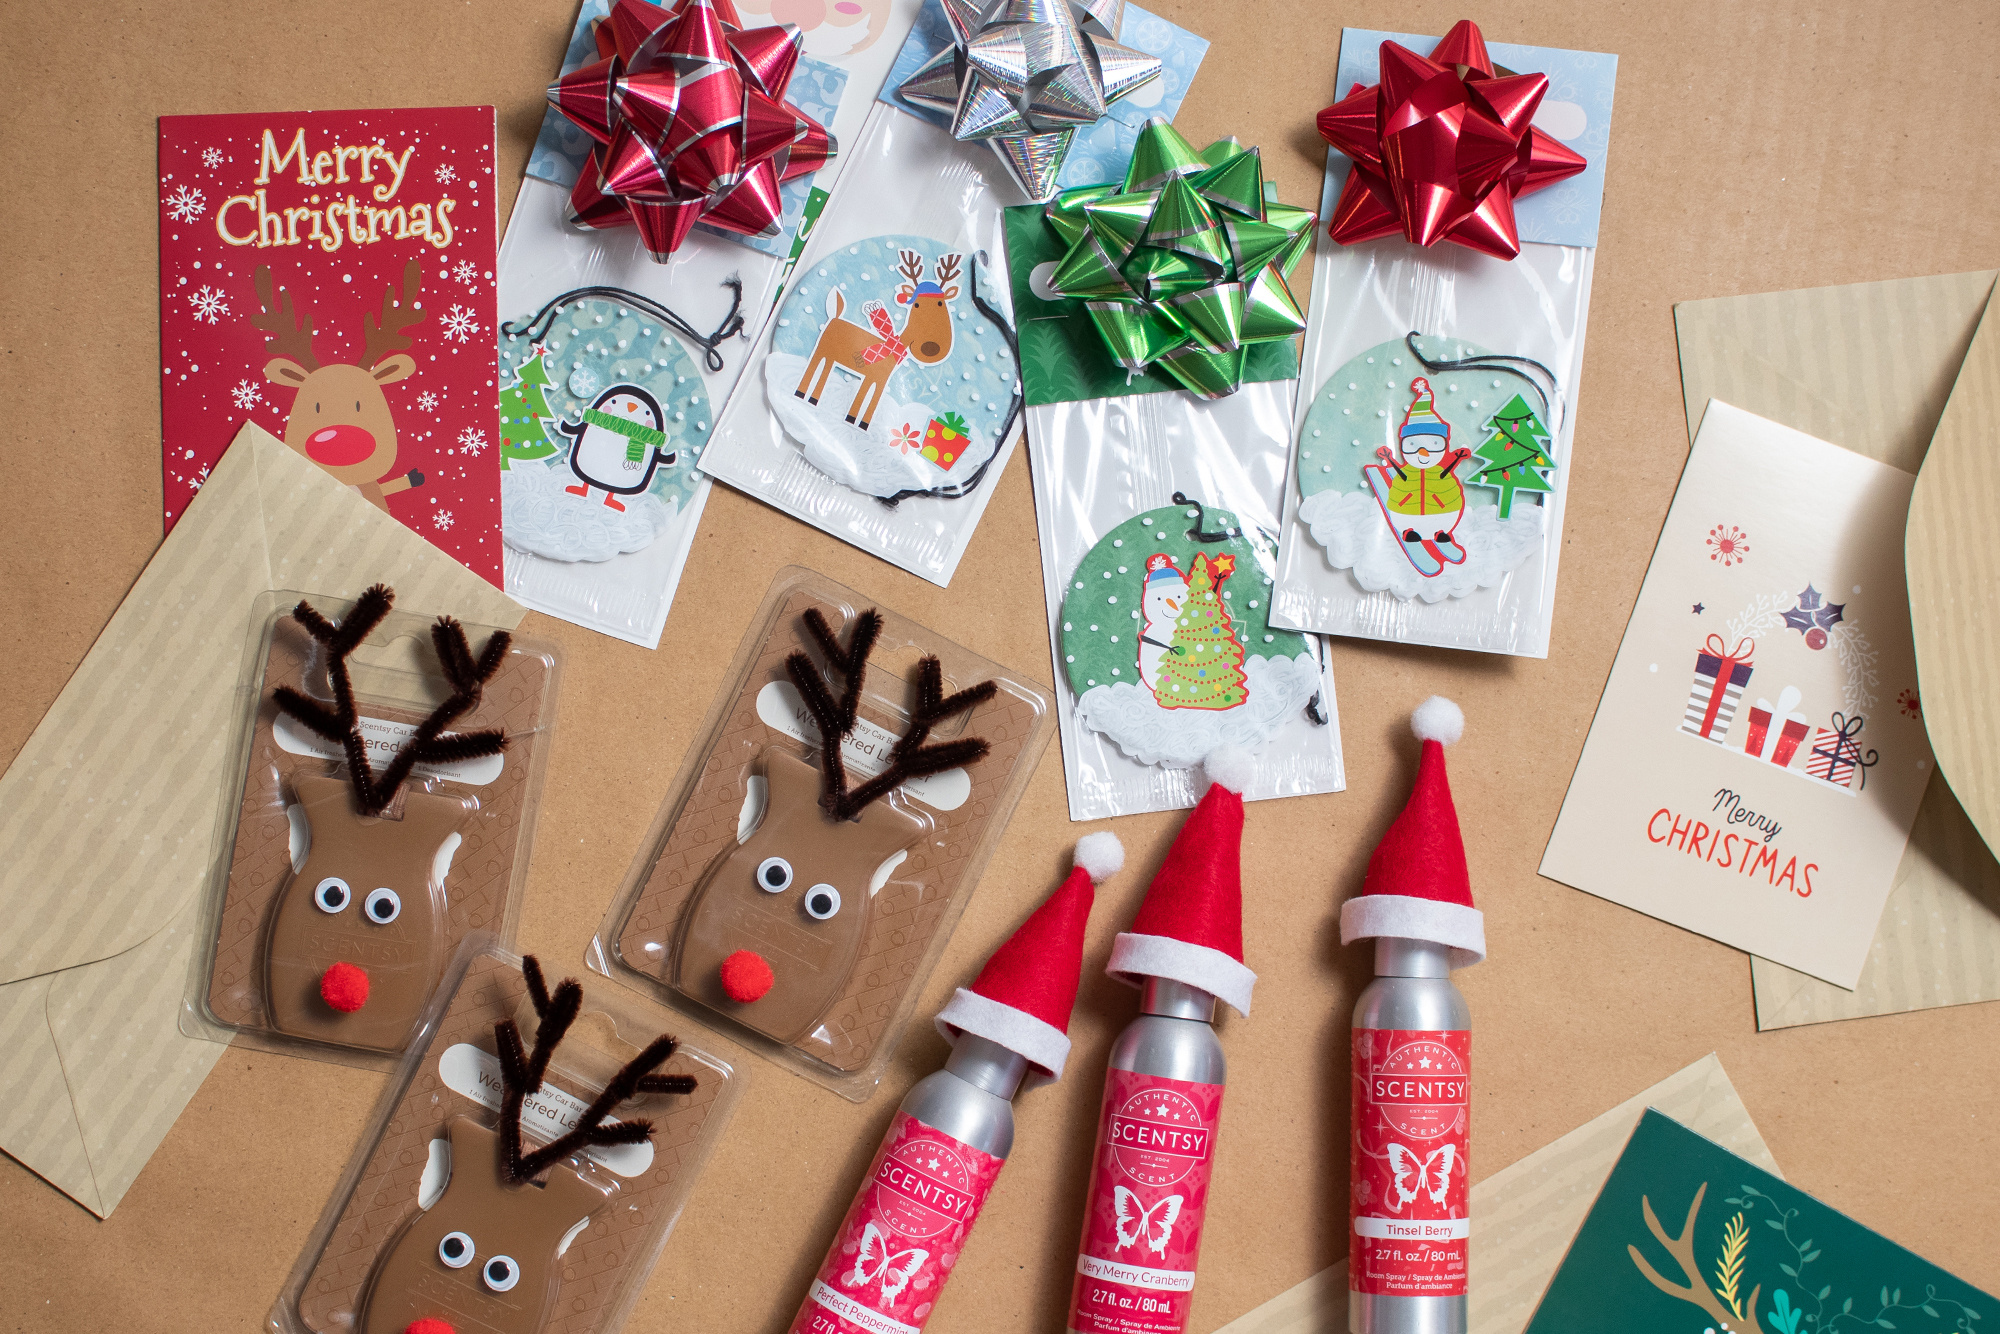 Gifts from Scentsy for the holiday season including room spray, car bars, and scent circles all wrapped in festive décor and ready to gift along with homemade Christmas cards